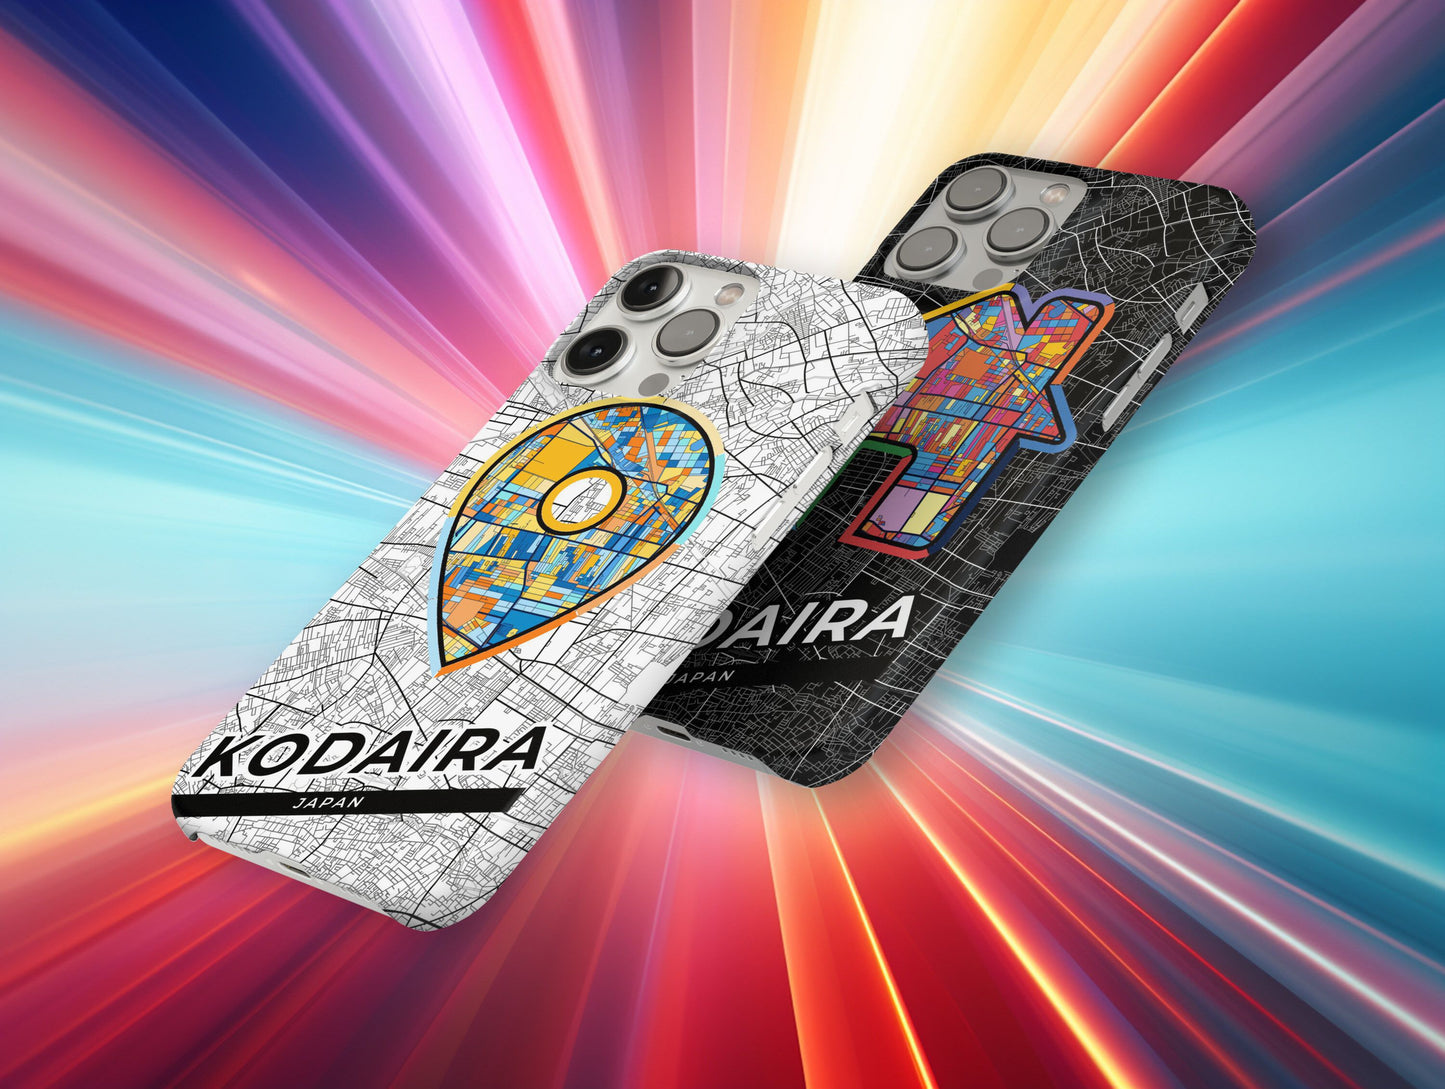 Kodaira Japan slim phone case with colorful icon. Birthday, wedding or housewarming gift. Couple match cases.